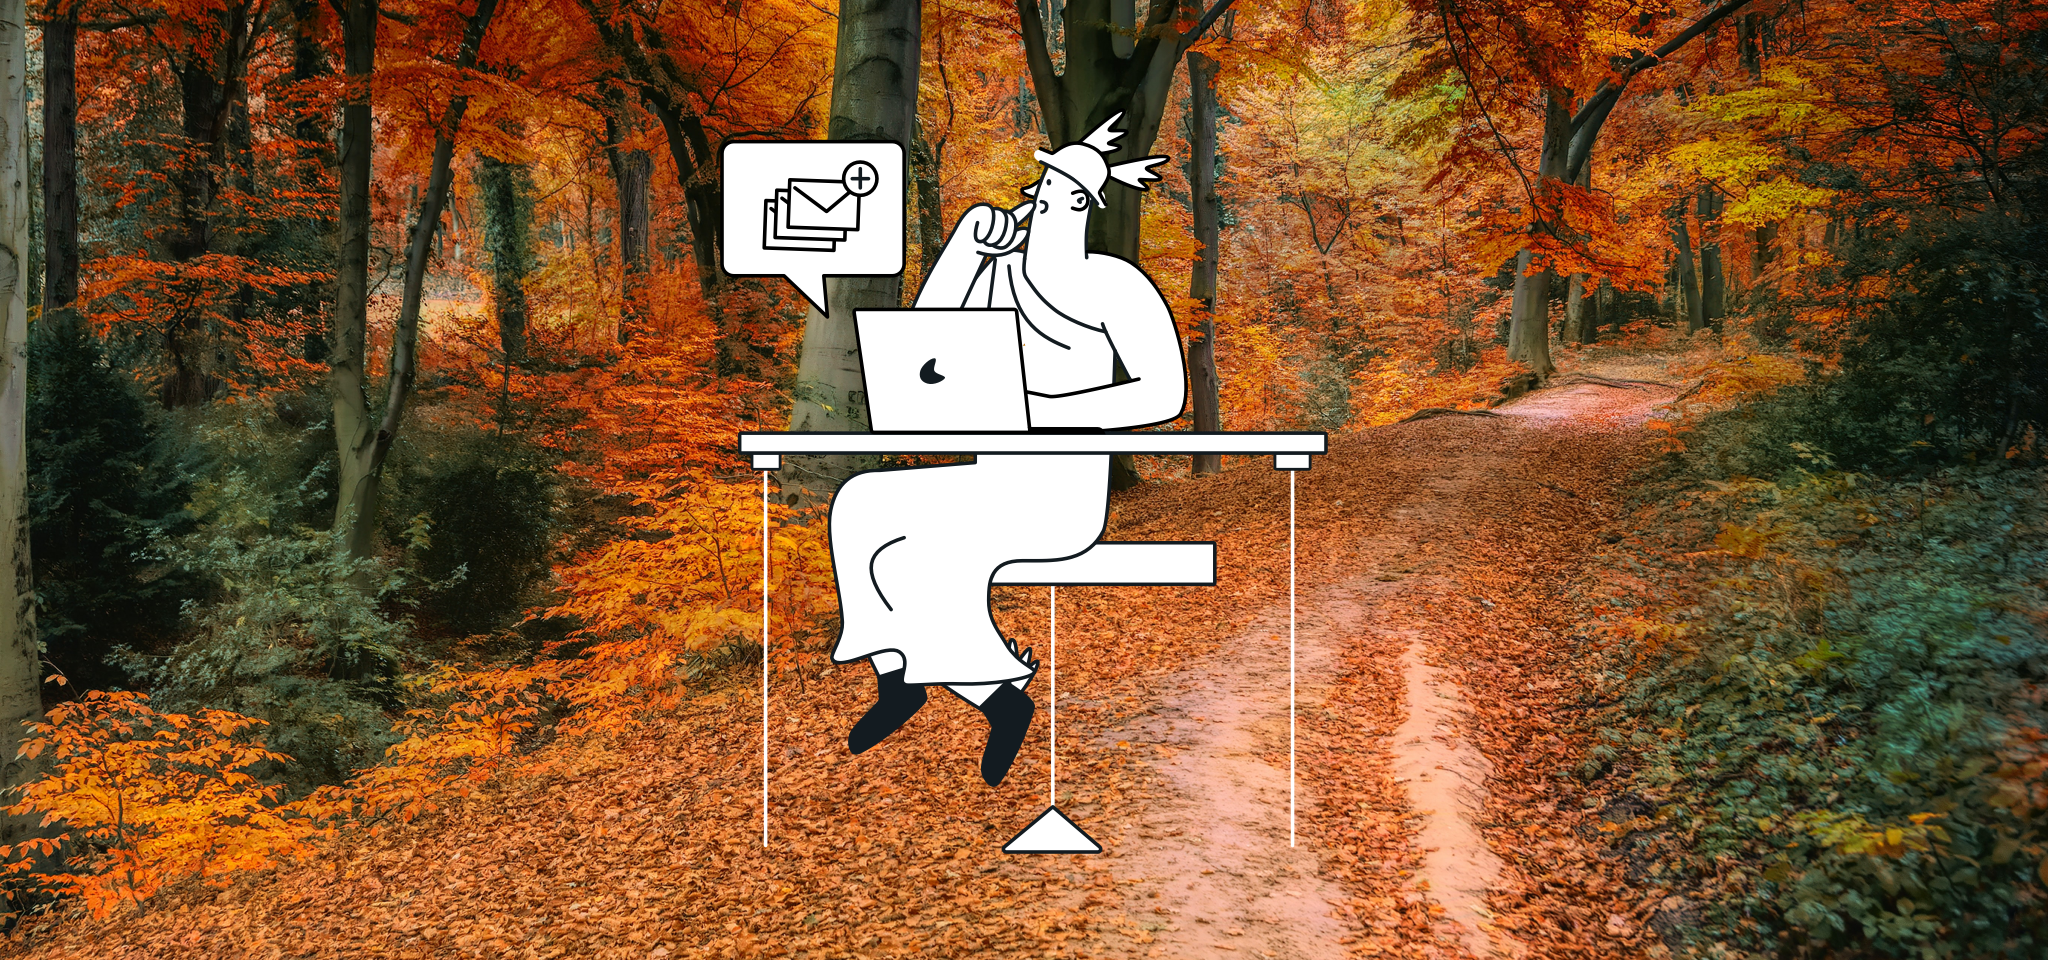 Hermes in a forest with a laptop.